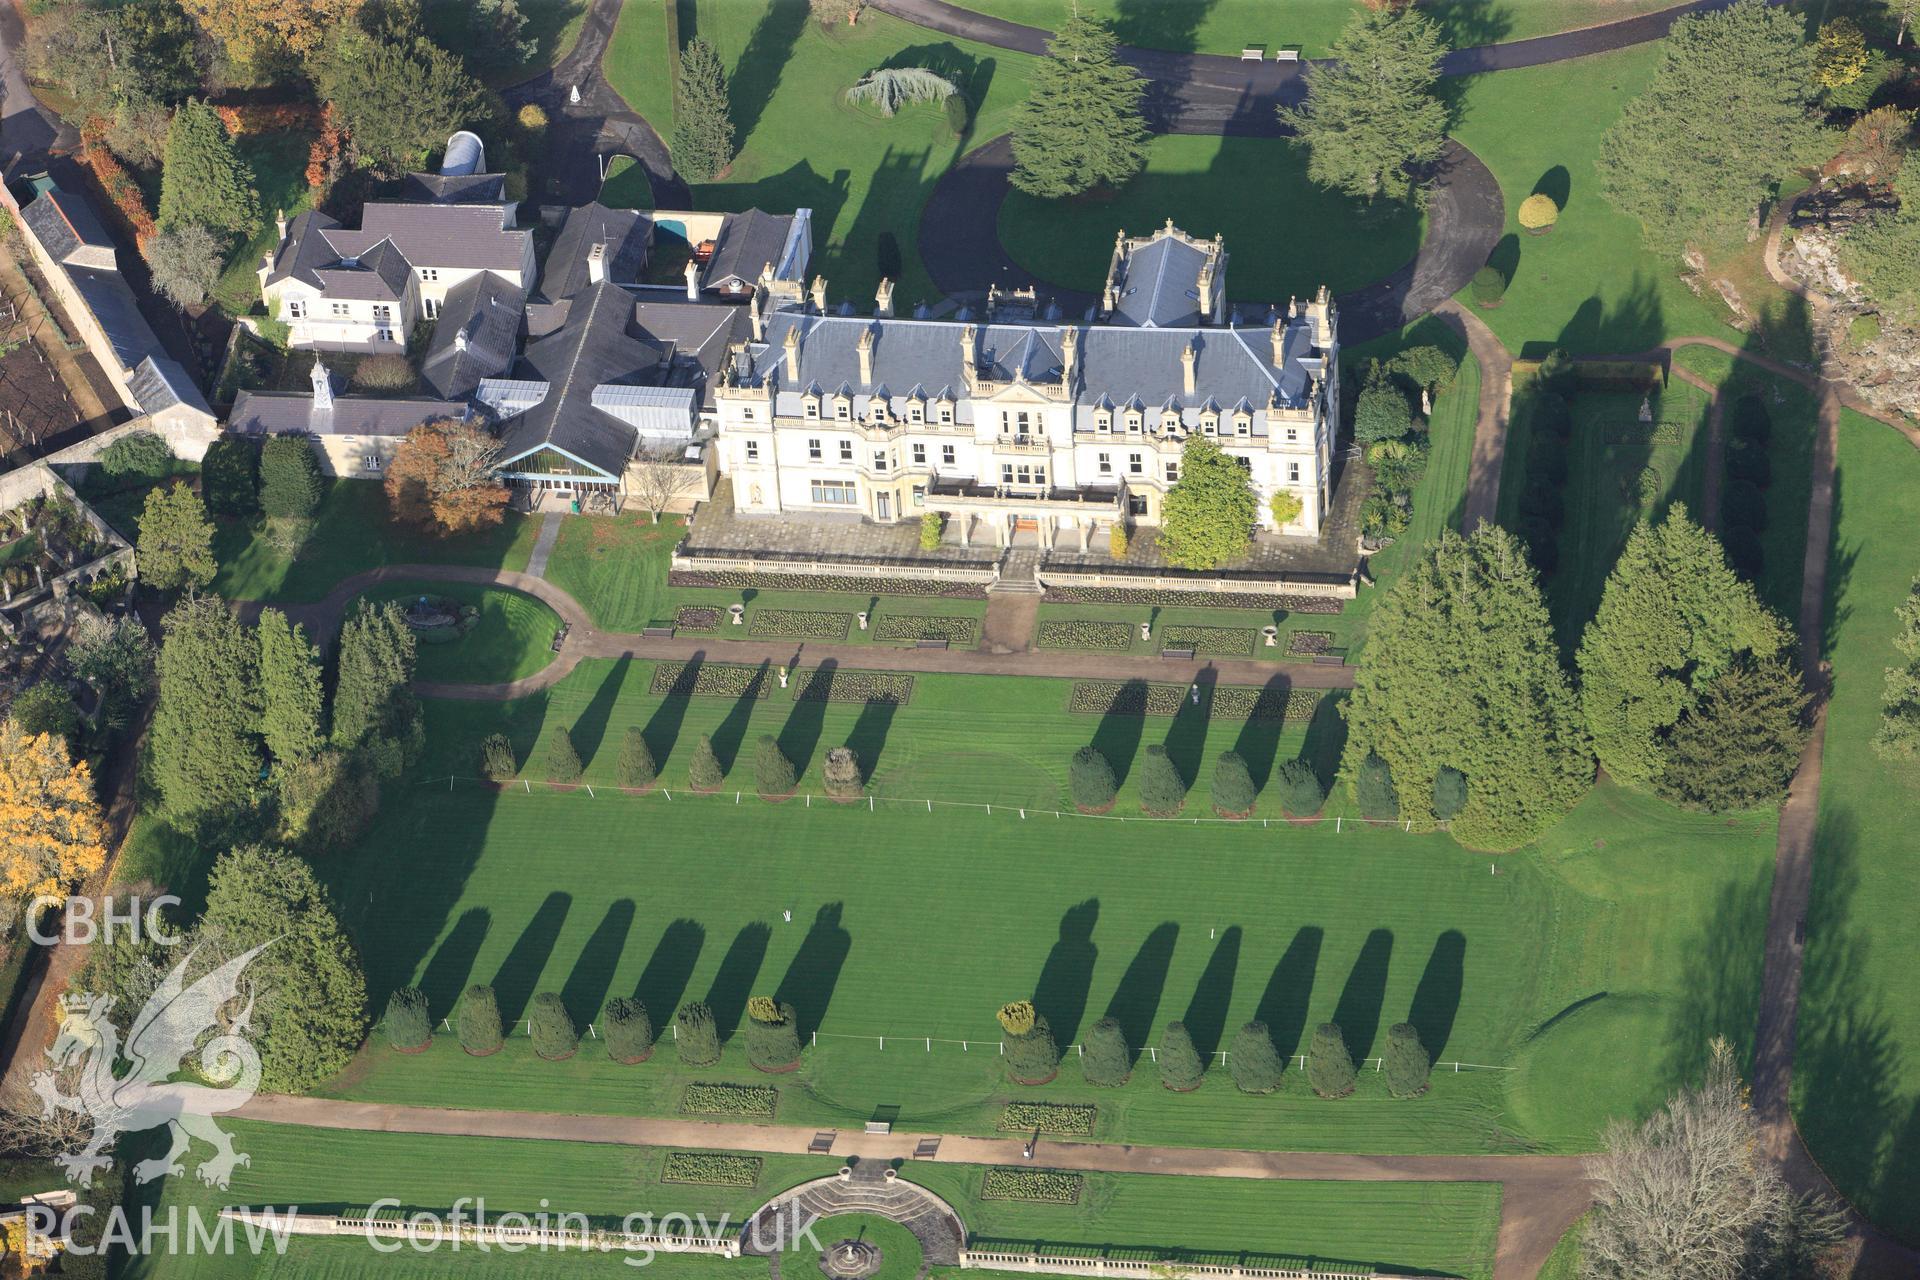 RCAHMW colour oblique photograph of Dyffryn House and Gardens. Taken by Toby Driver on 17/11/2011.